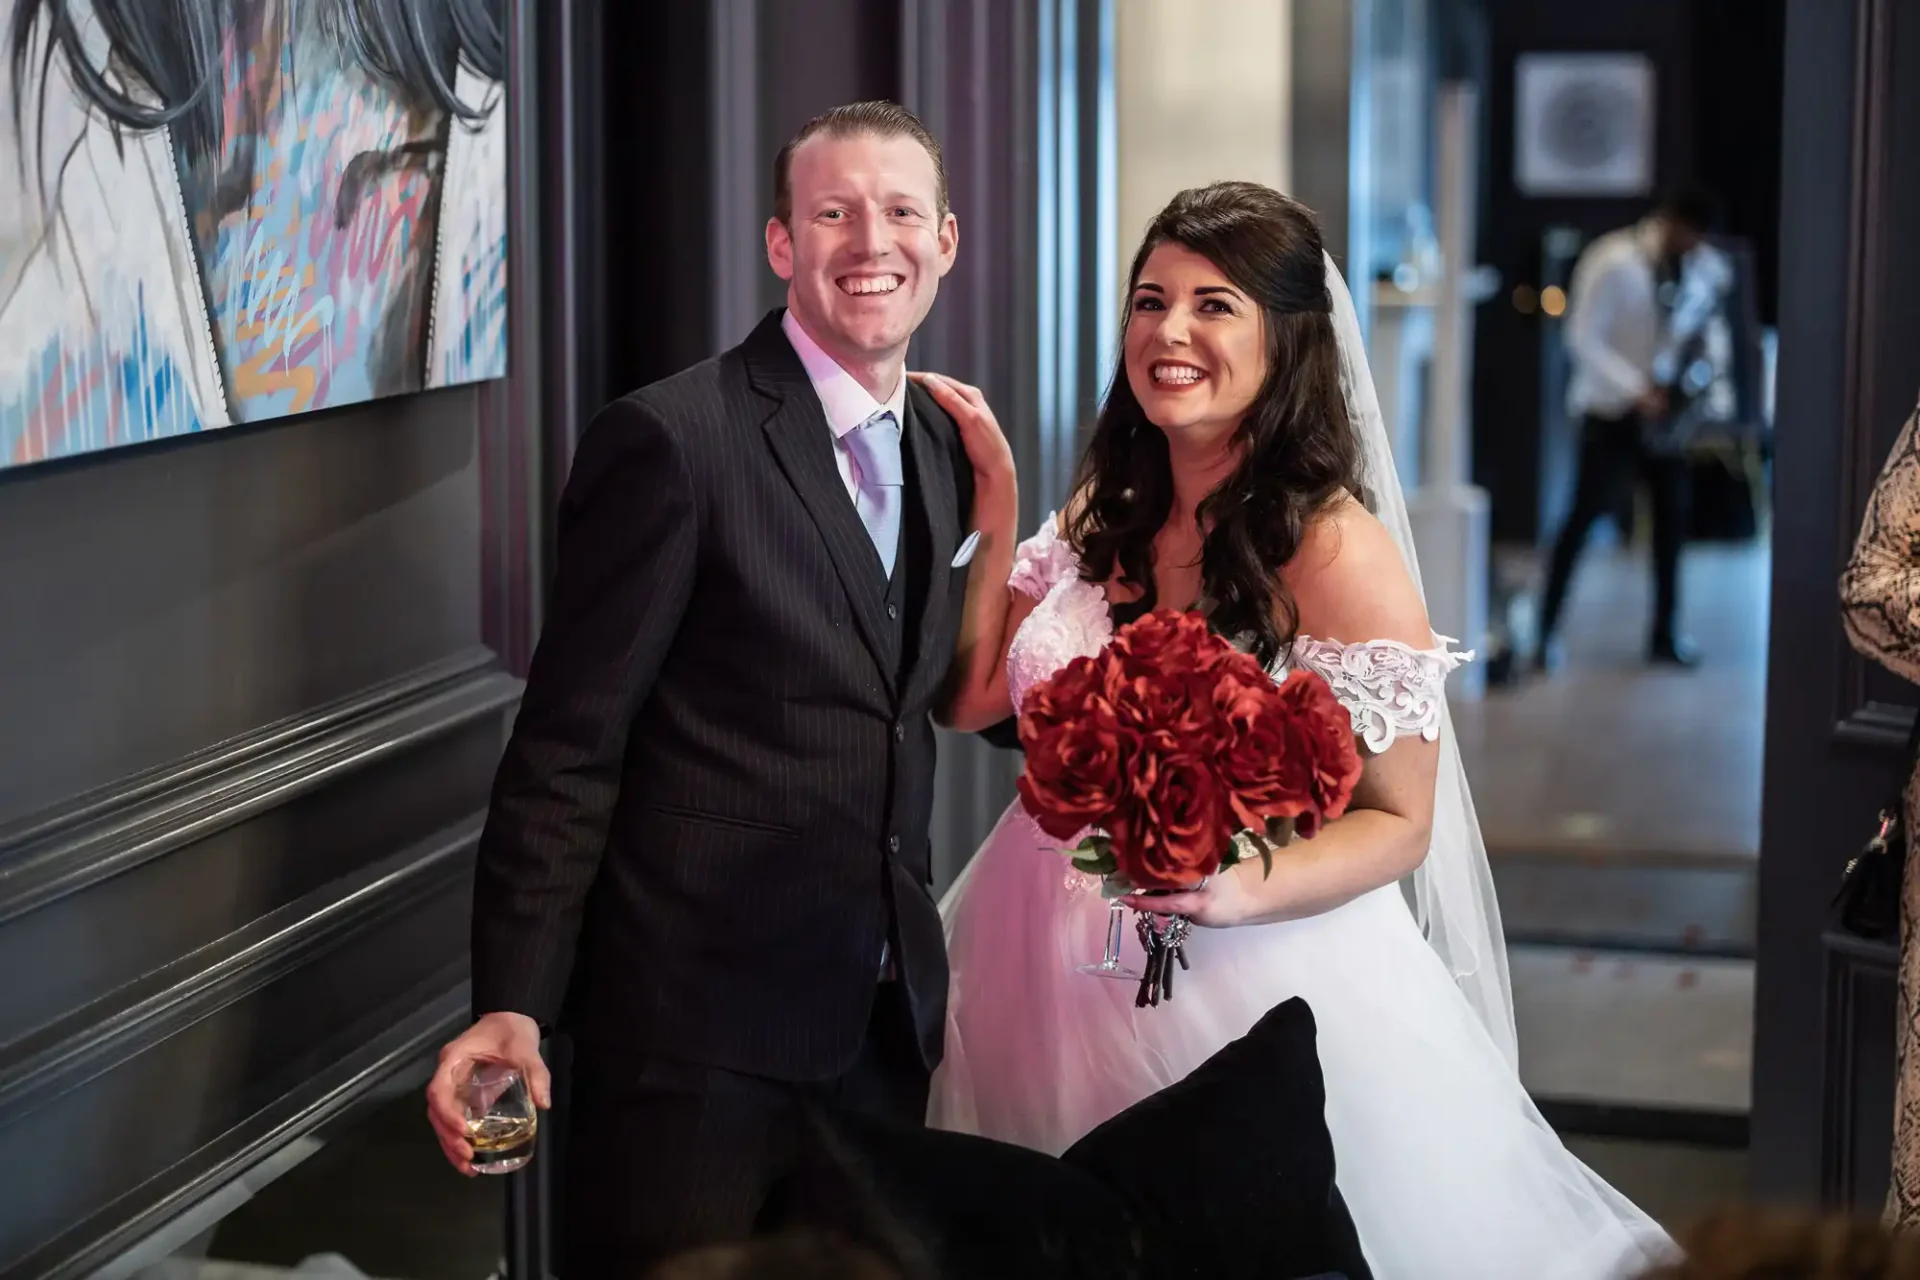 A newlywed couple smiling joyously; the groom in a black suit holds a drink, and the bride in an off-shoulder gown clutches a bouquet of red roses.